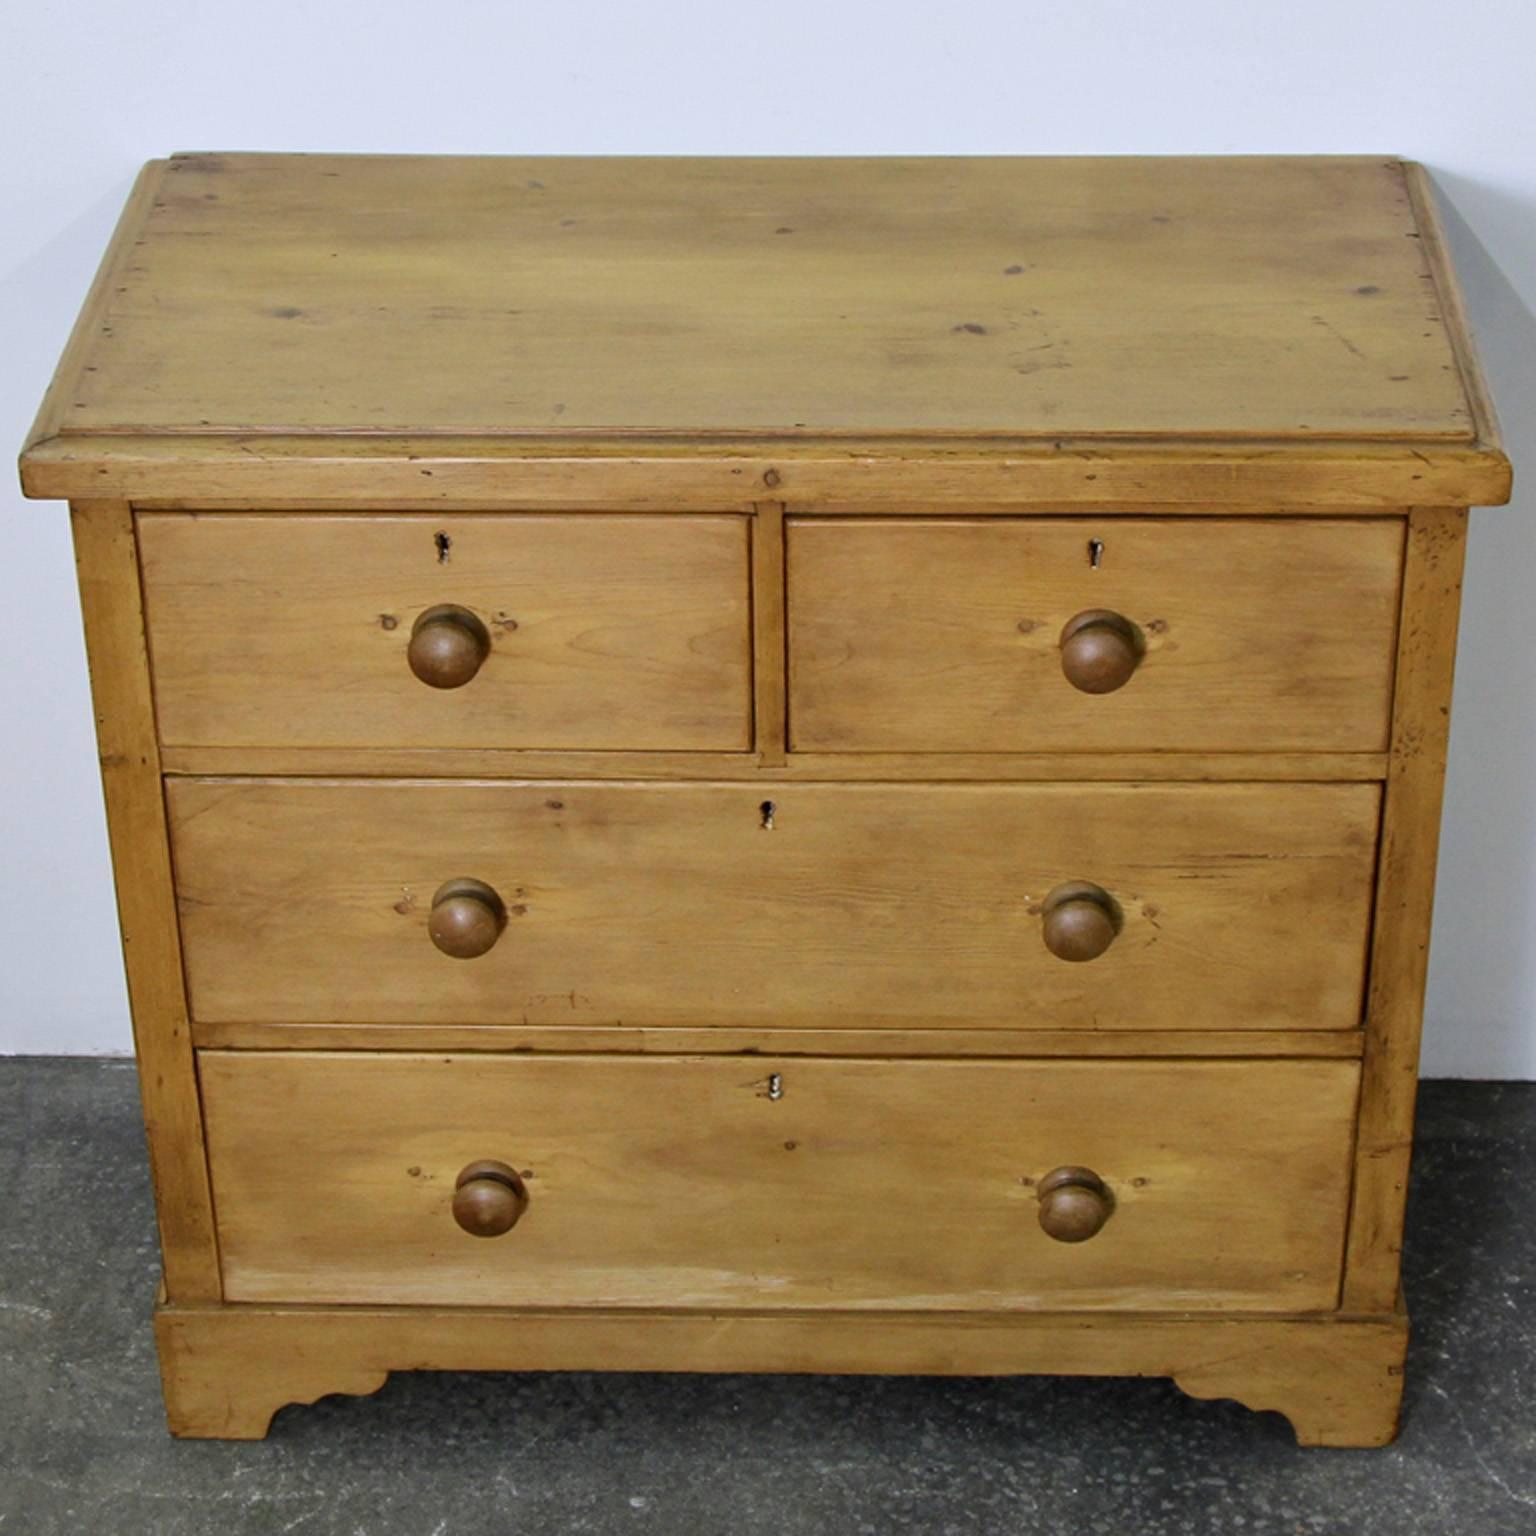 Wonderful small English pine chest of drawers in excellent condition. Great as an end table or nightstand.